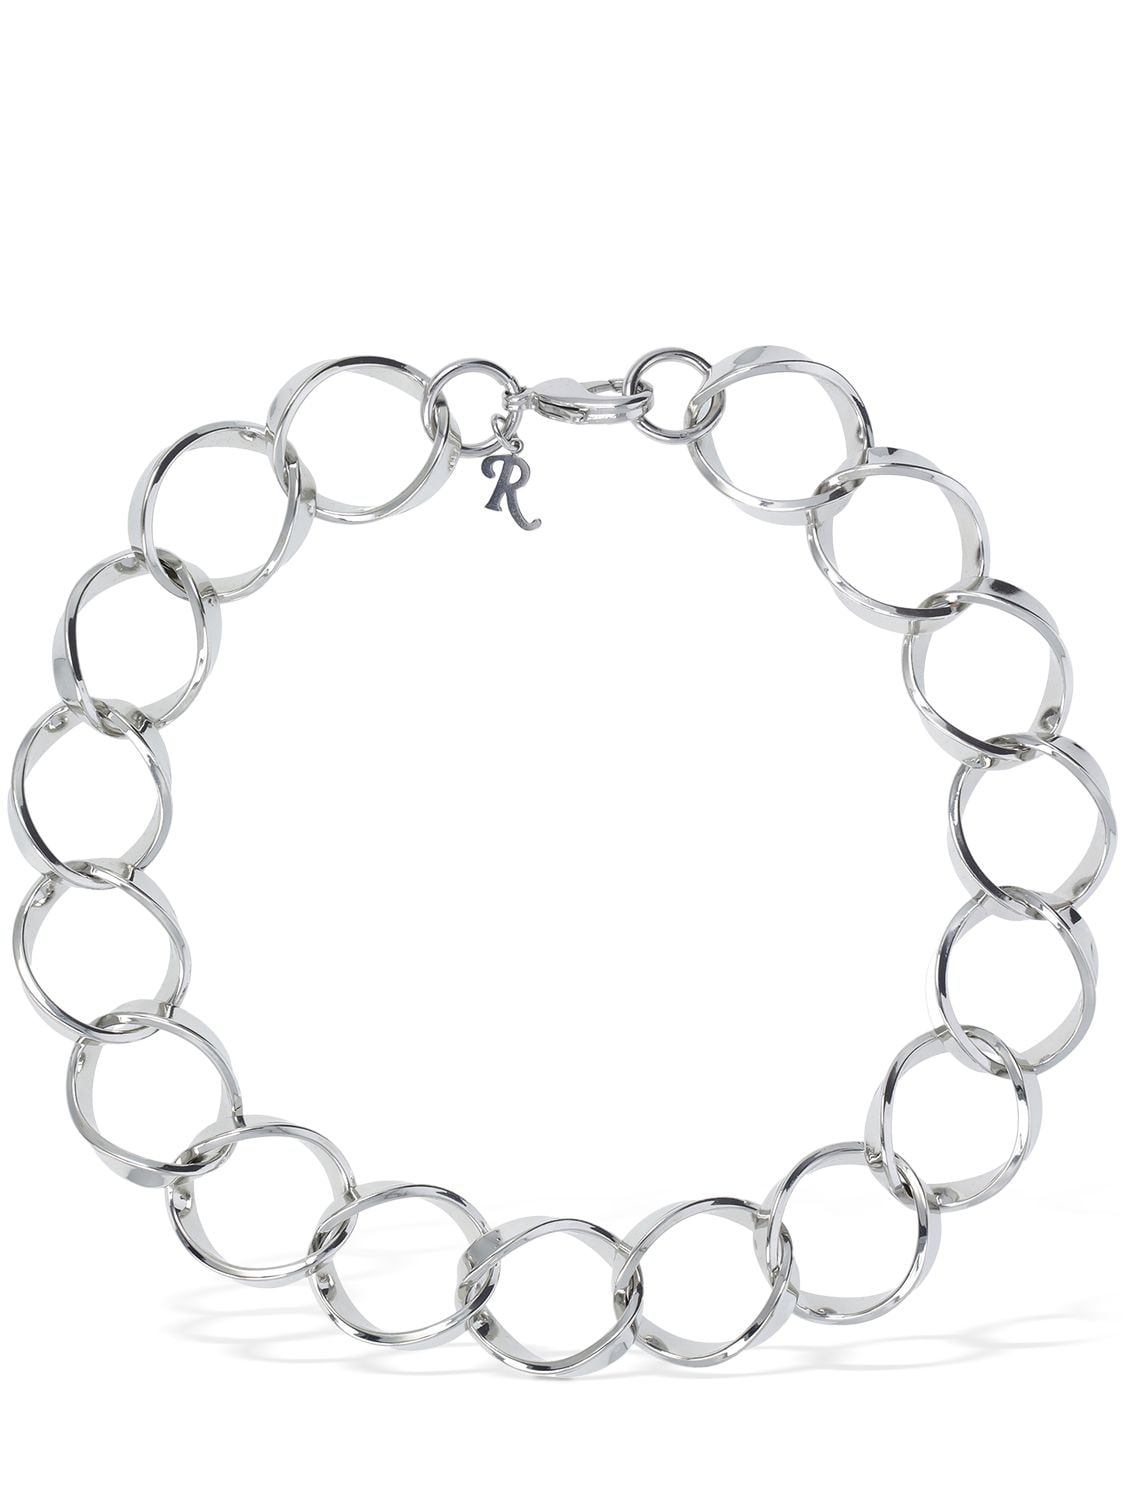 RAF SIMONS LINKED RINGS CHAIN COLLAR NECKLACE